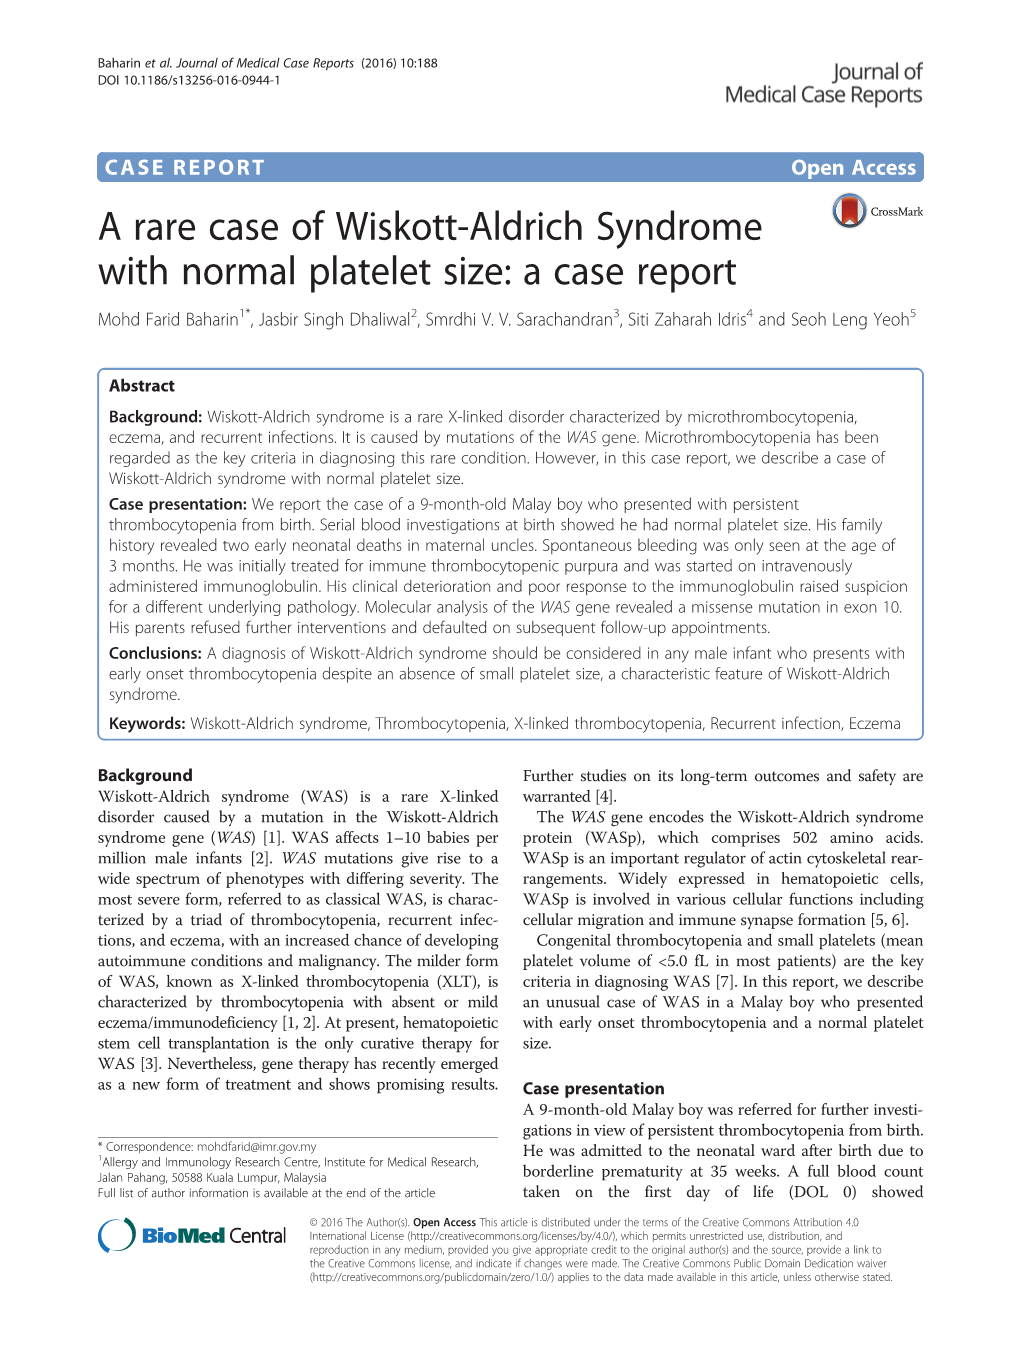 A Rare Case of Wiskott-Aldrich Syndrome with Normal Platelet Size: a Case Report Mohd Farid Baharin1*, Jasbir Singh Dhaliwal2, Smrdhi V